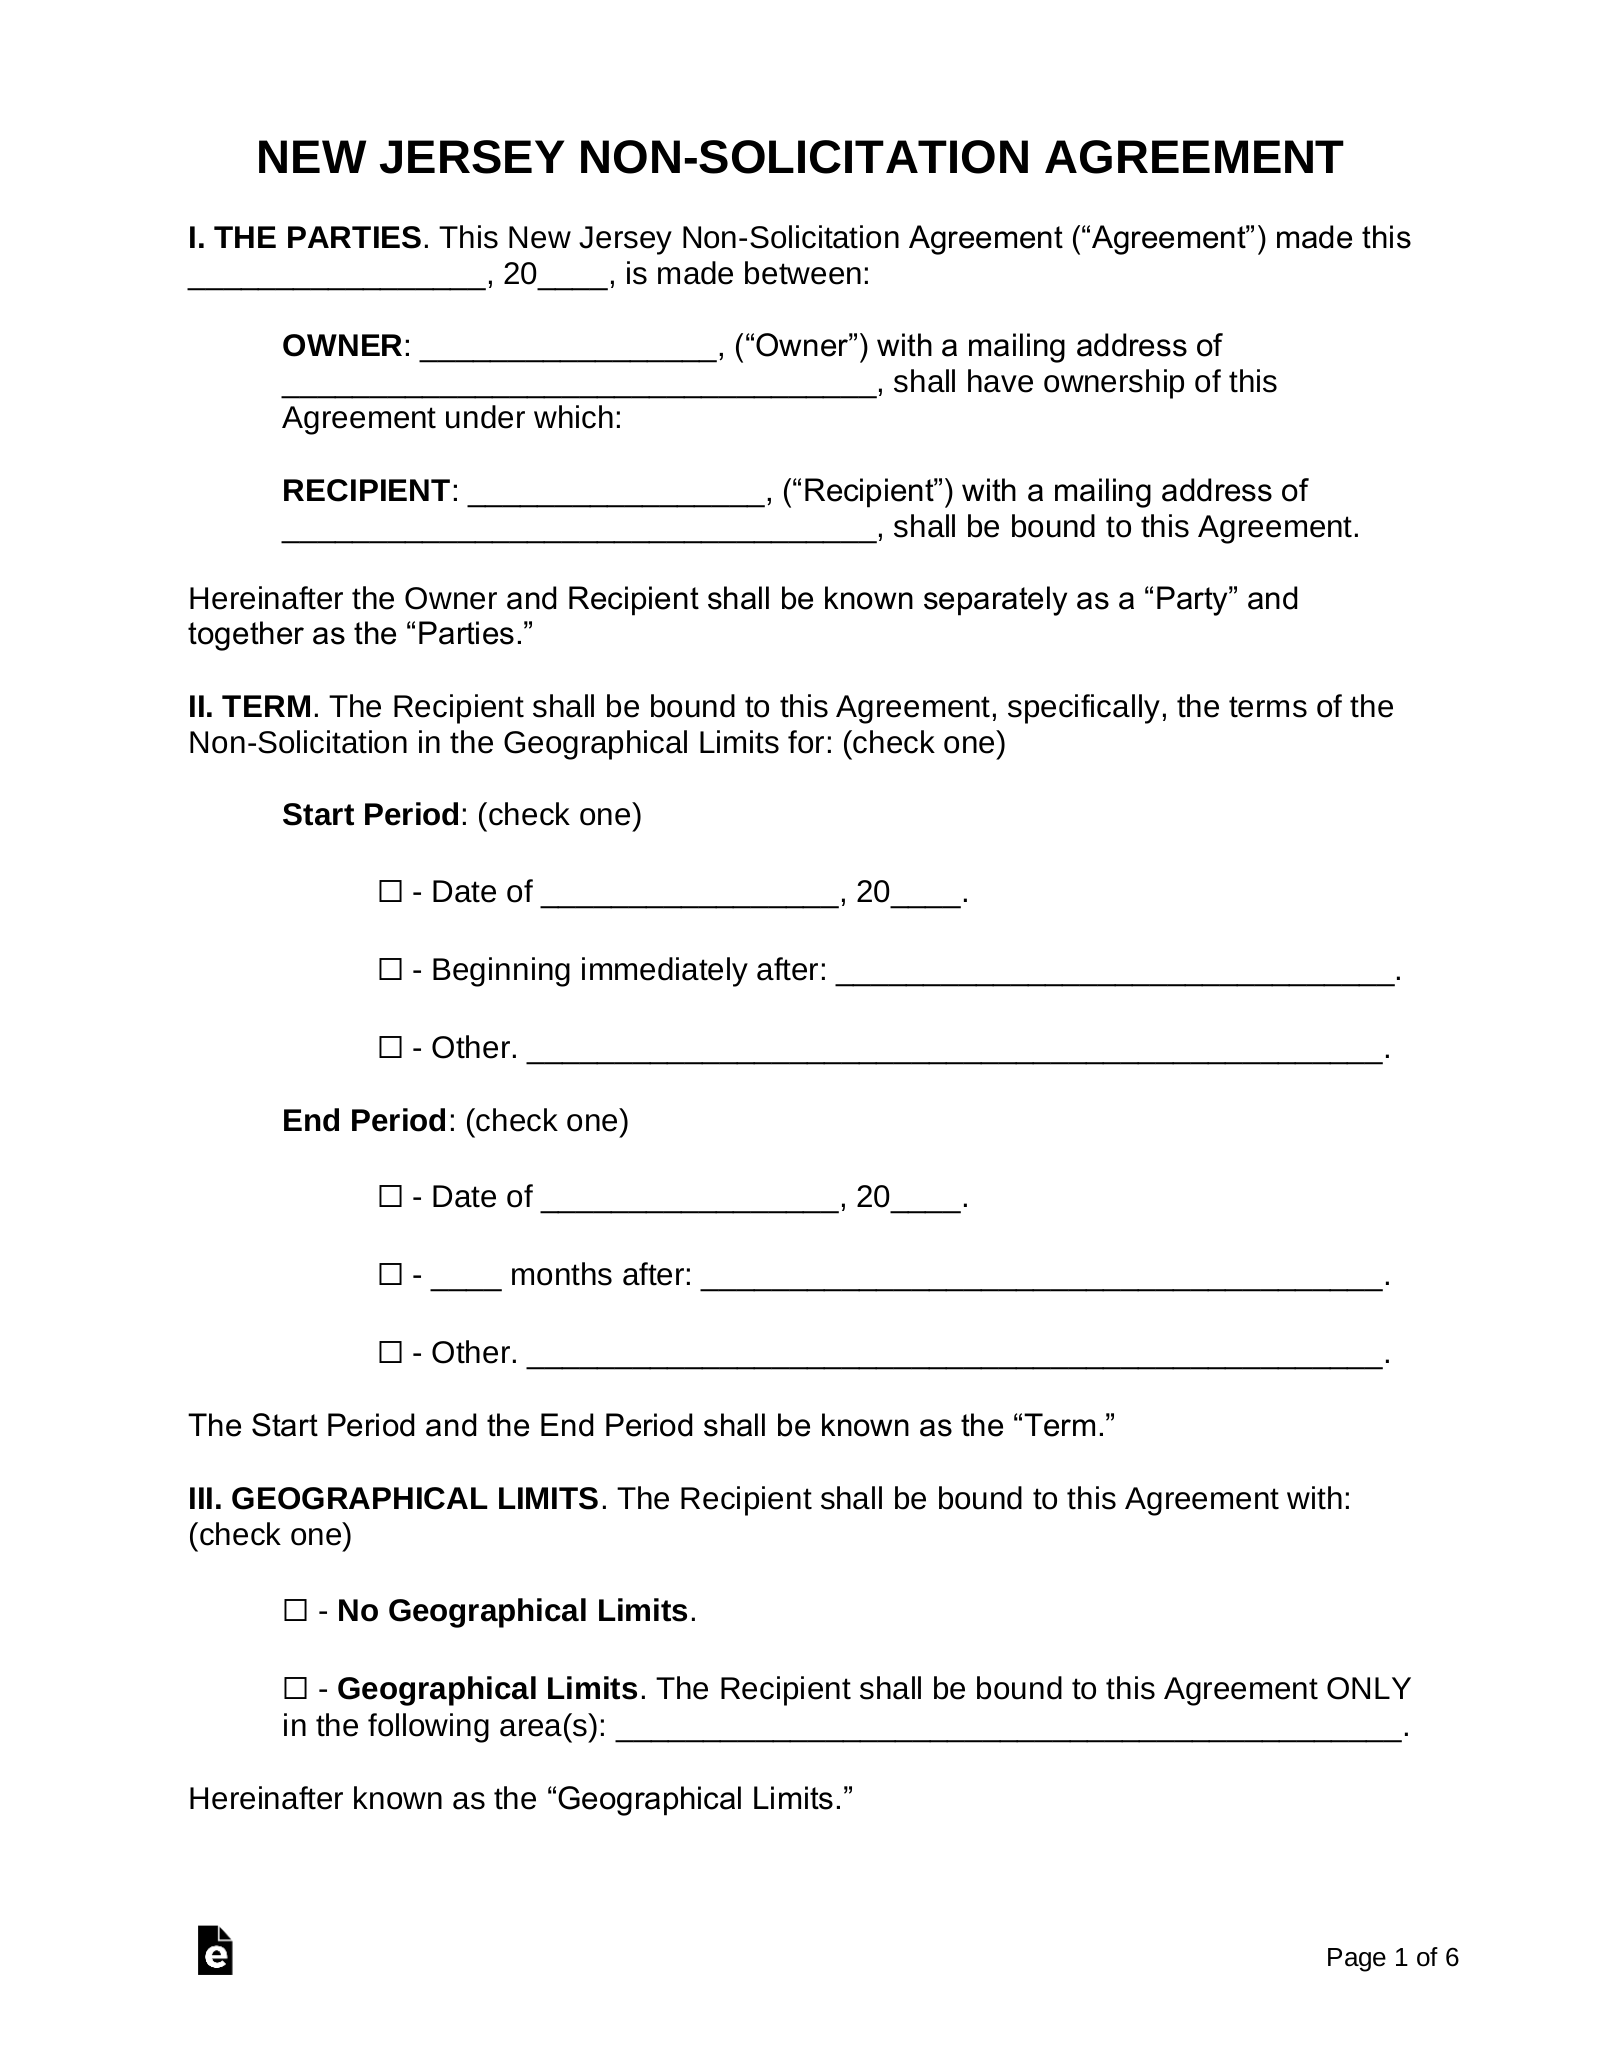 New Jersey Non-Solicitation Agreement